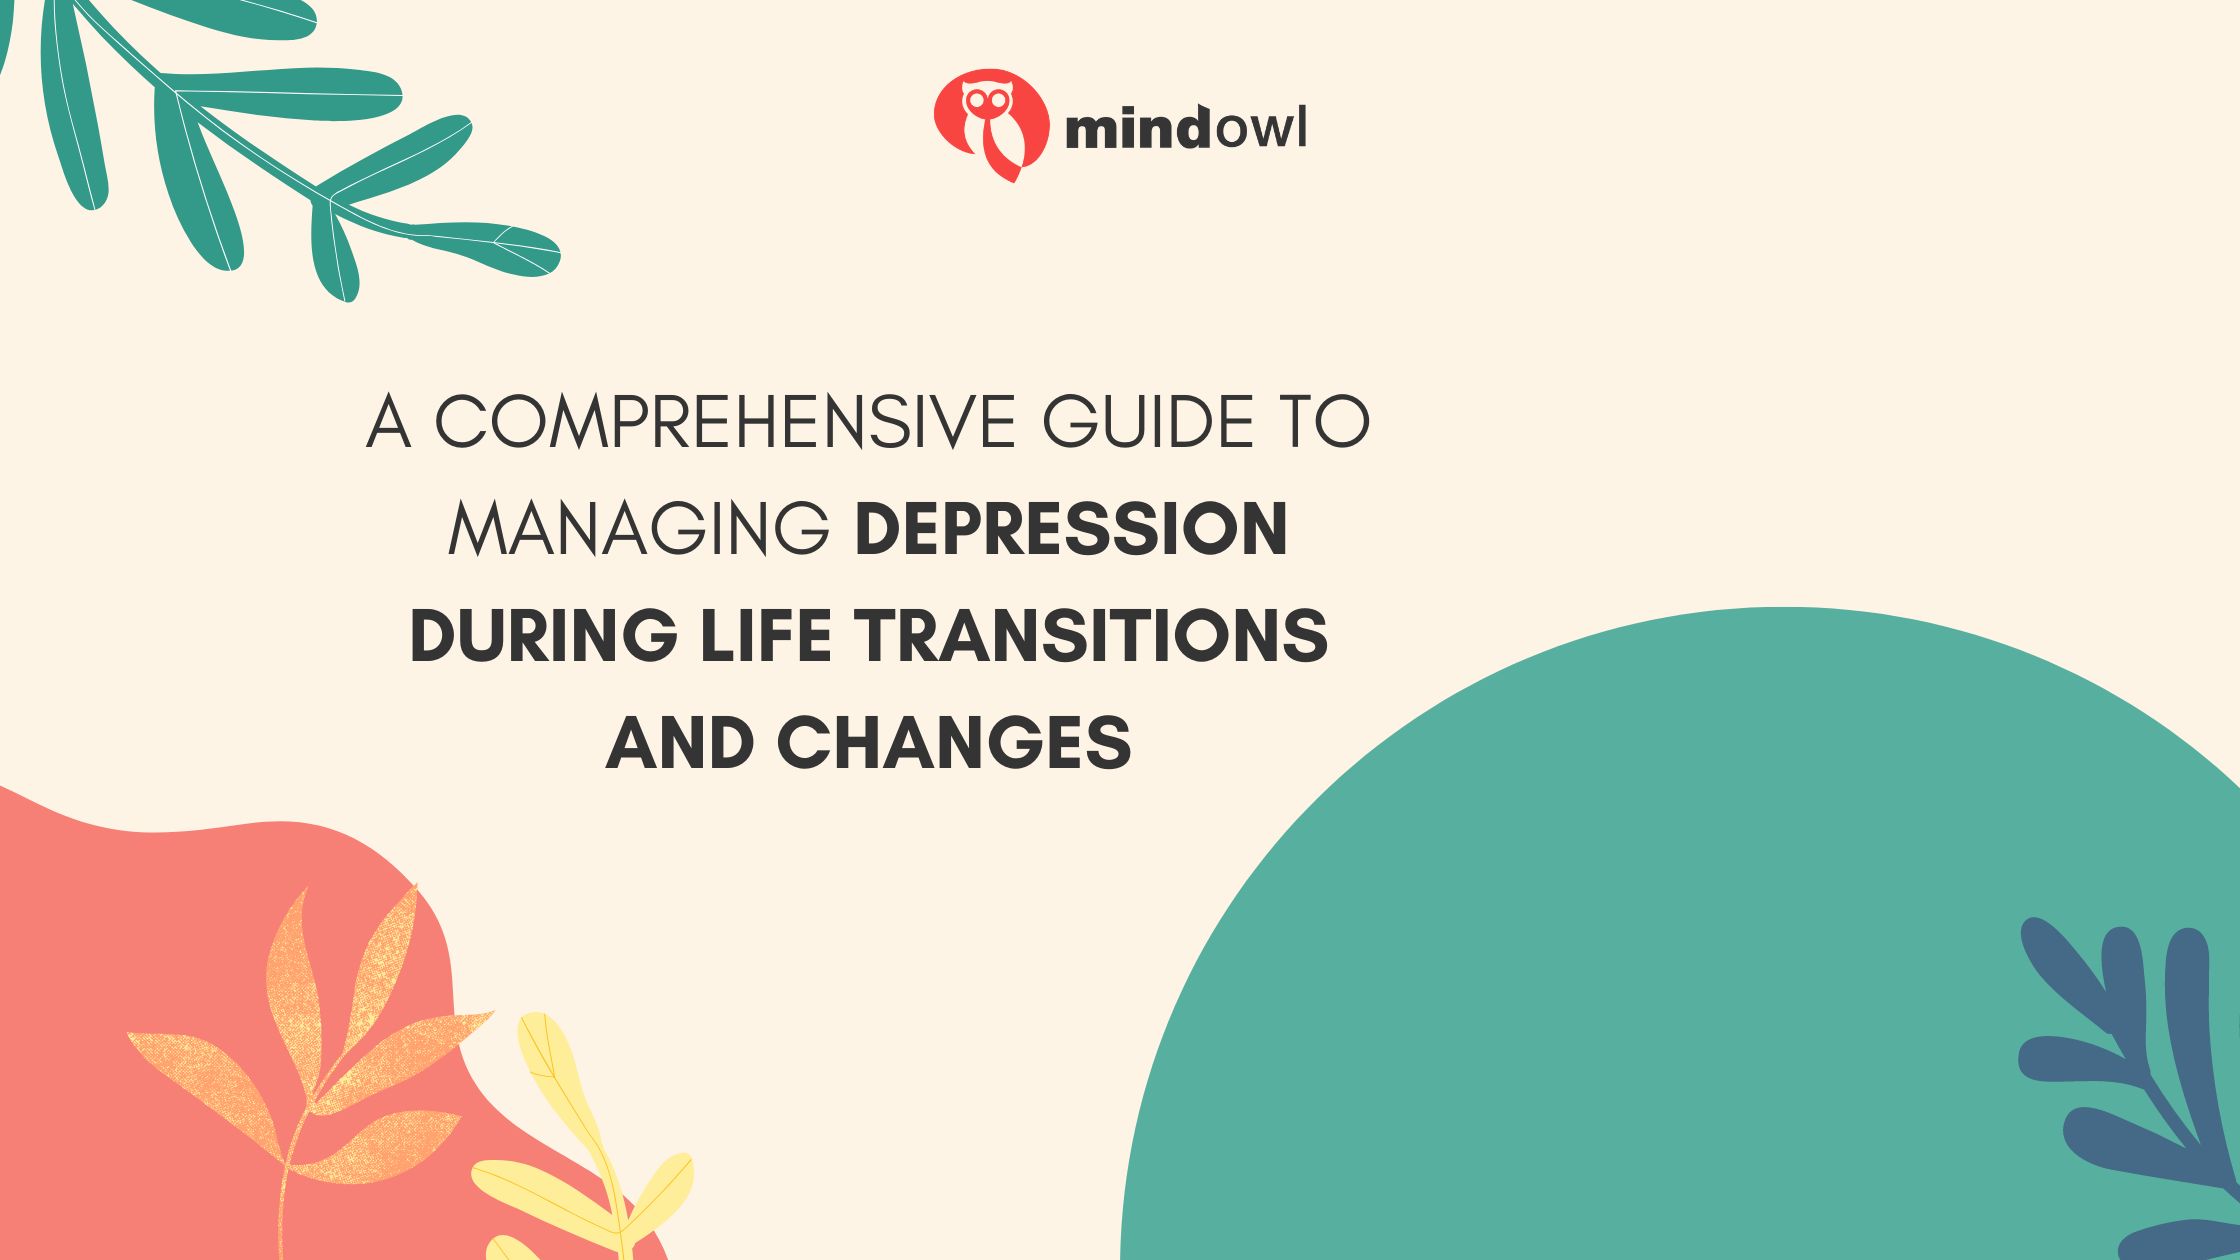 A Comprehensive Guide To Managing Depression During Life Transitions And Changes